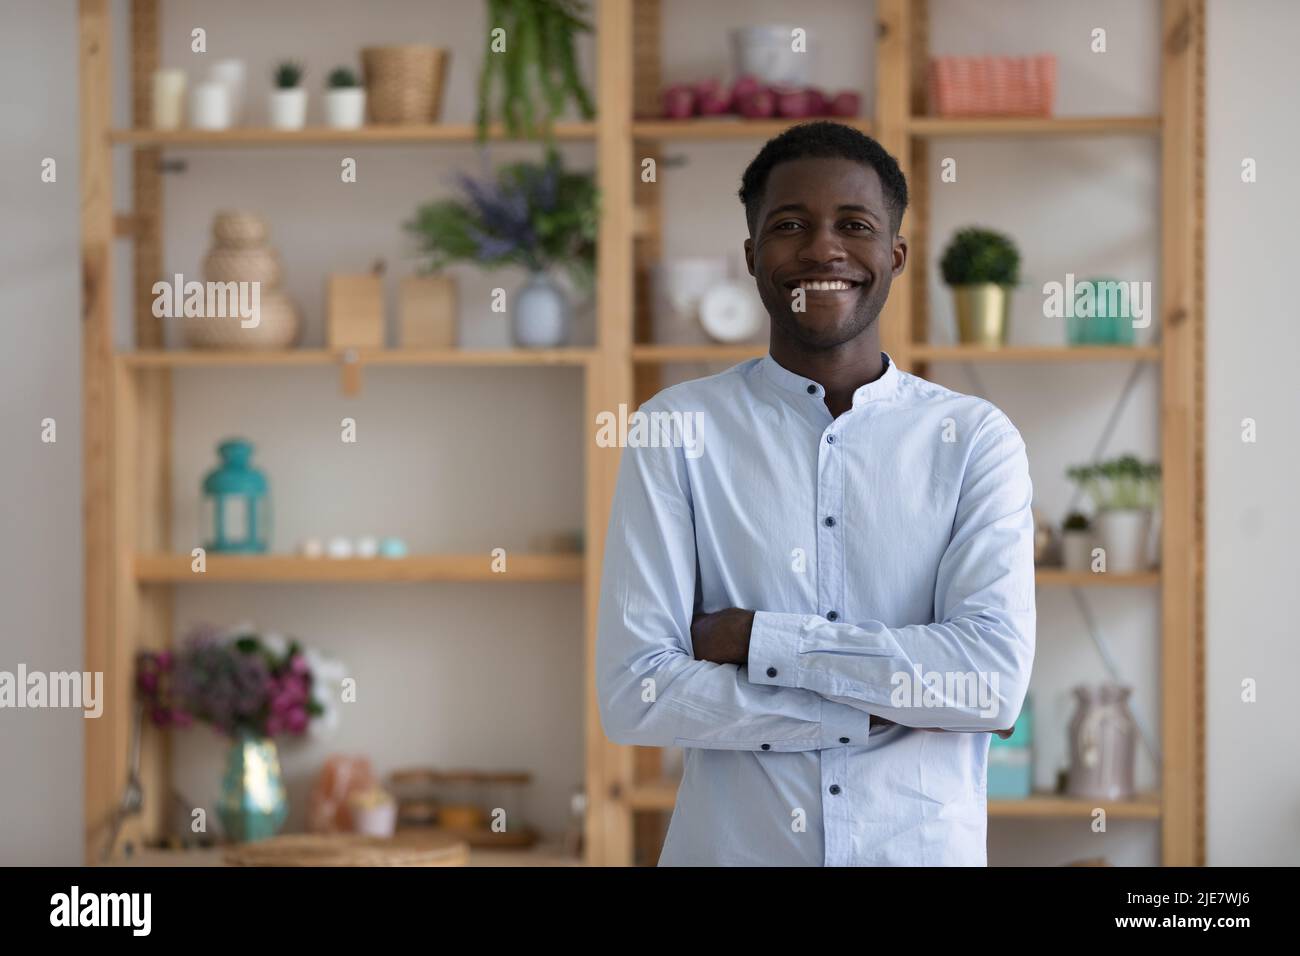 African businessman or office employee smile look at camera Stock Photo